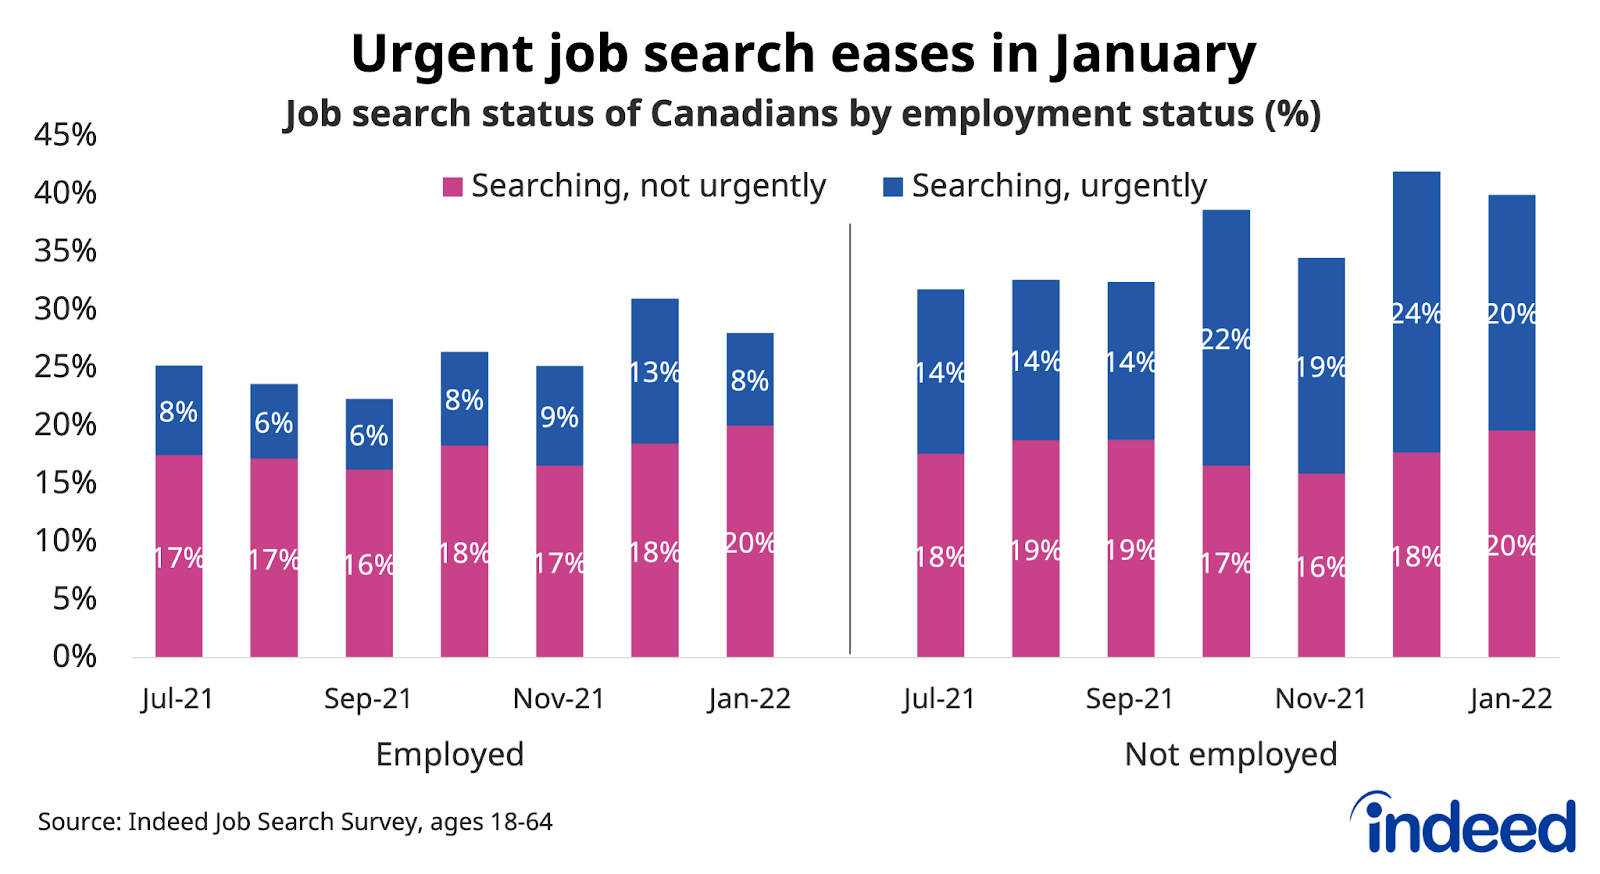 Bar chart titled “Urgent job search eases in January.”